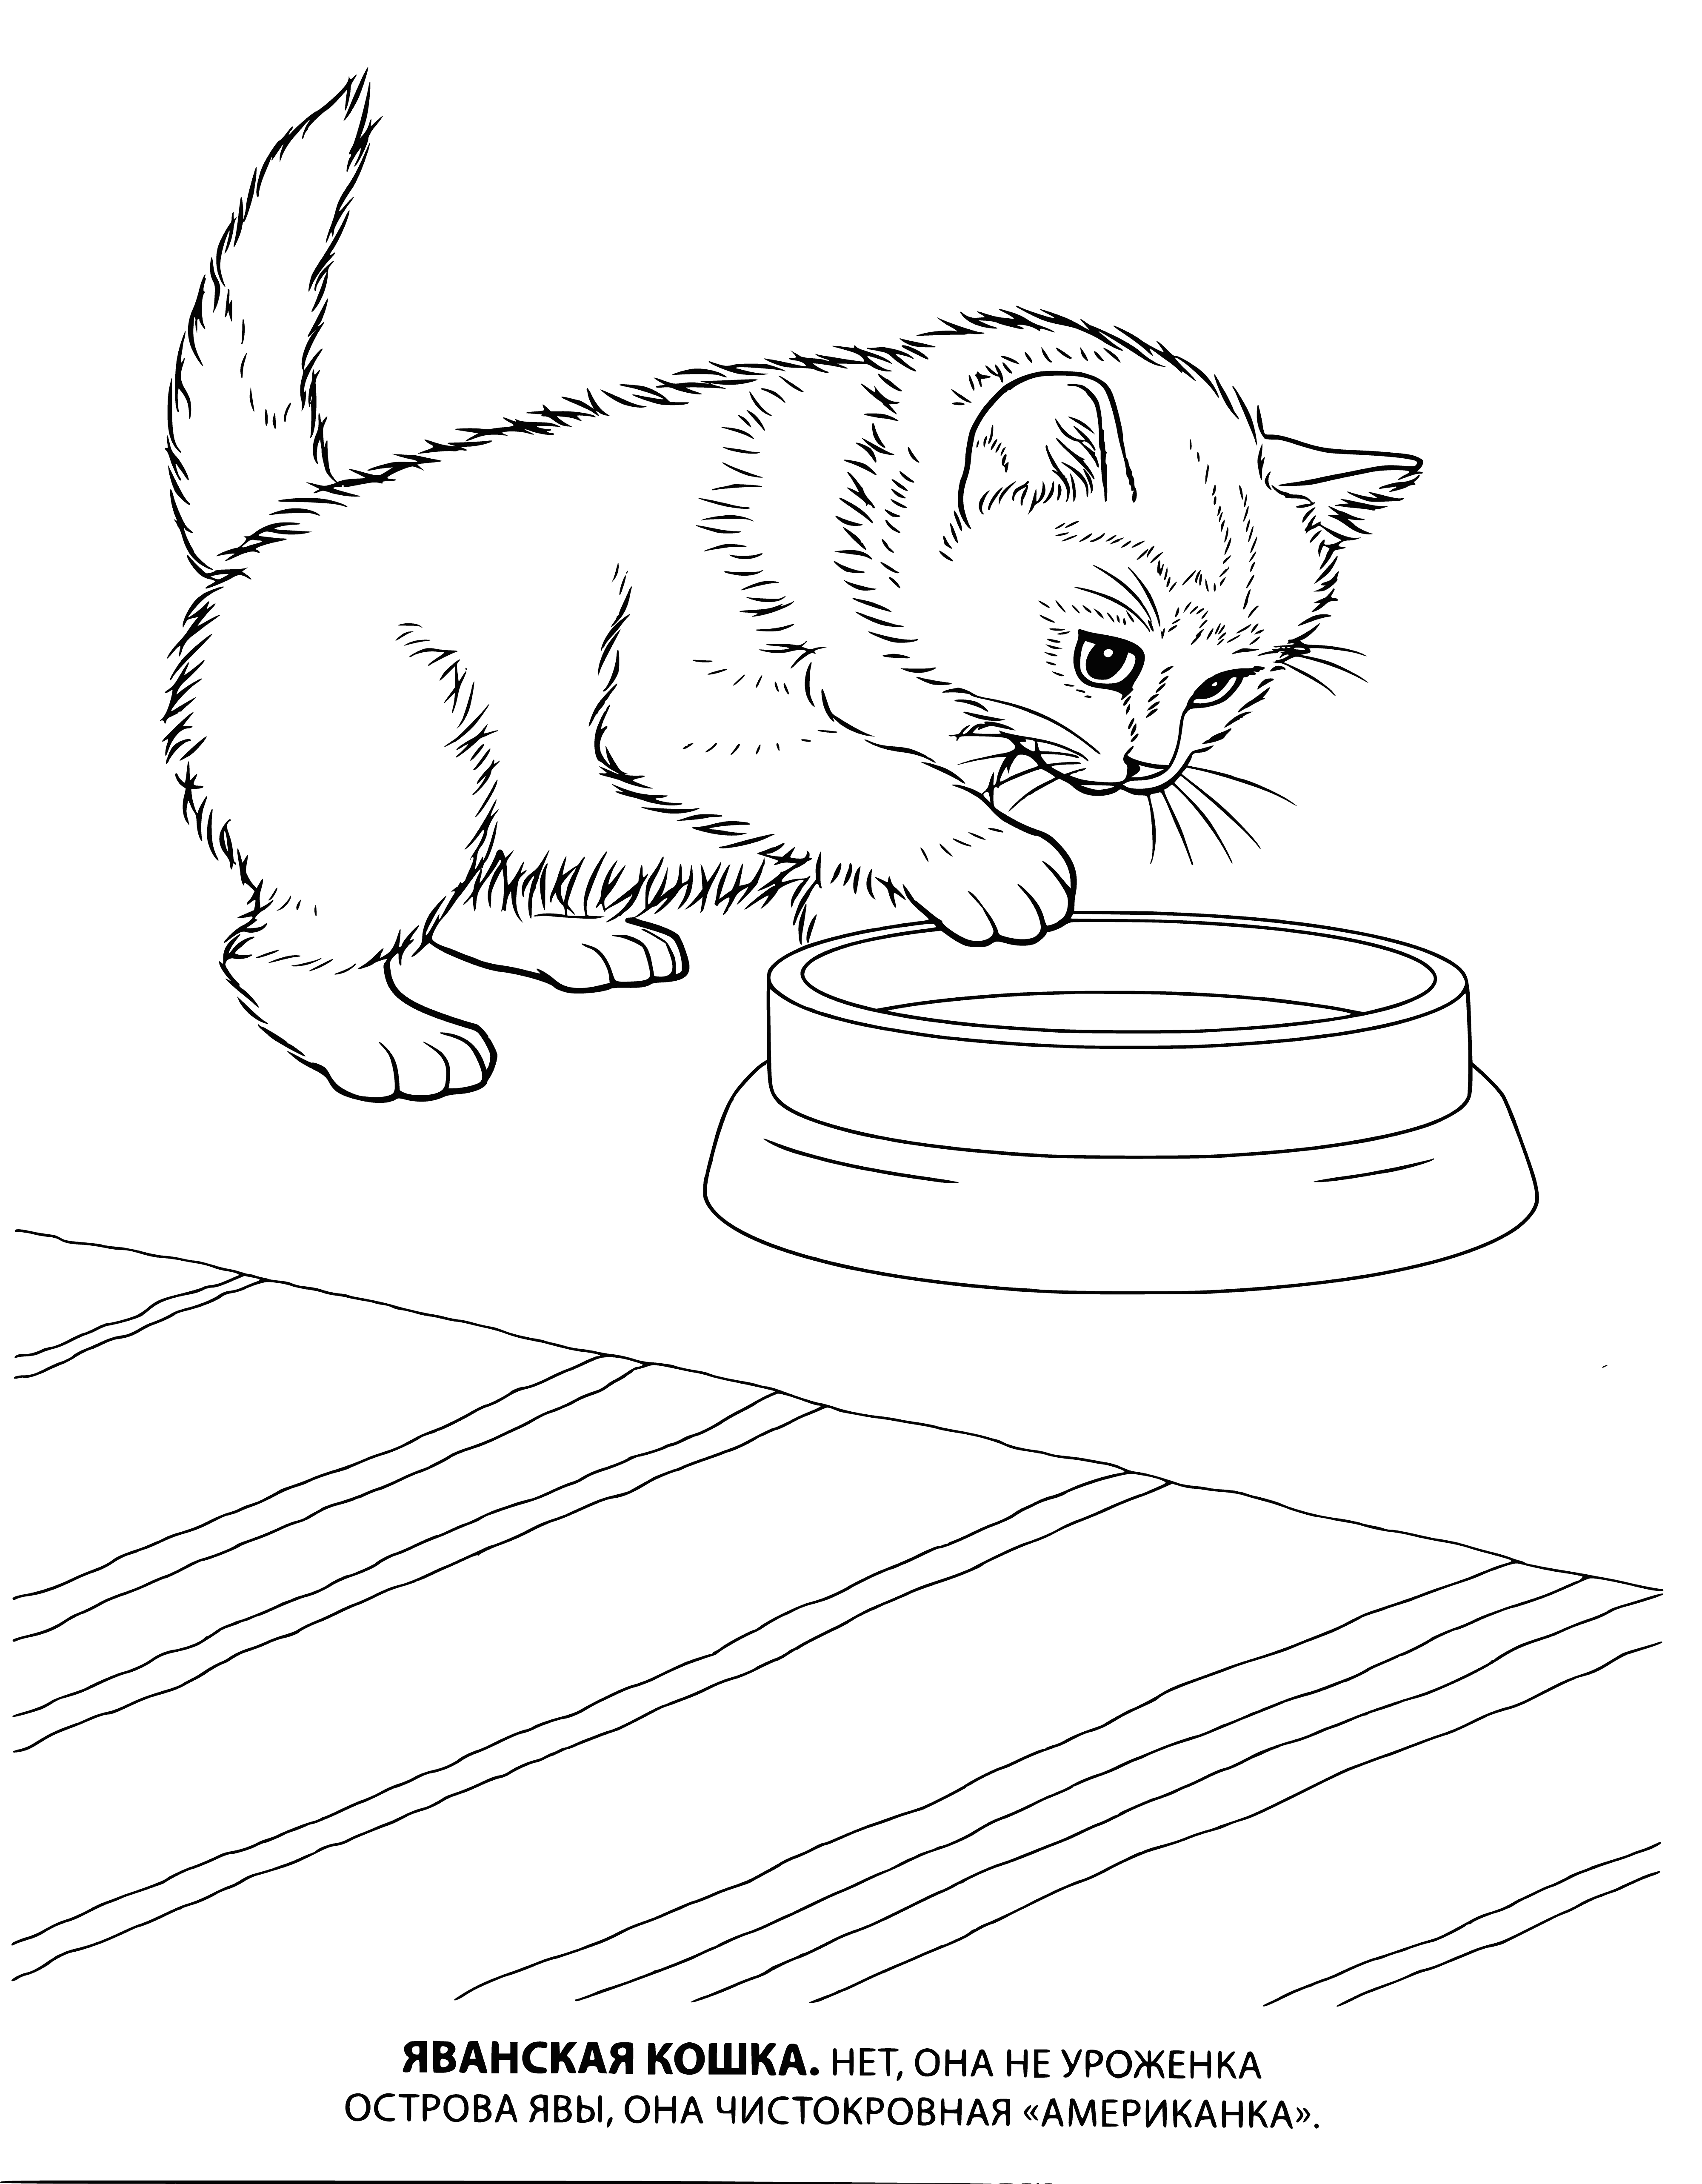 coloring page: Loving and gentle Javanese cats have a sleek coat and are known for their intelligence, grace, agility and curiosity. They are quieter than other breeds and come in many colors.